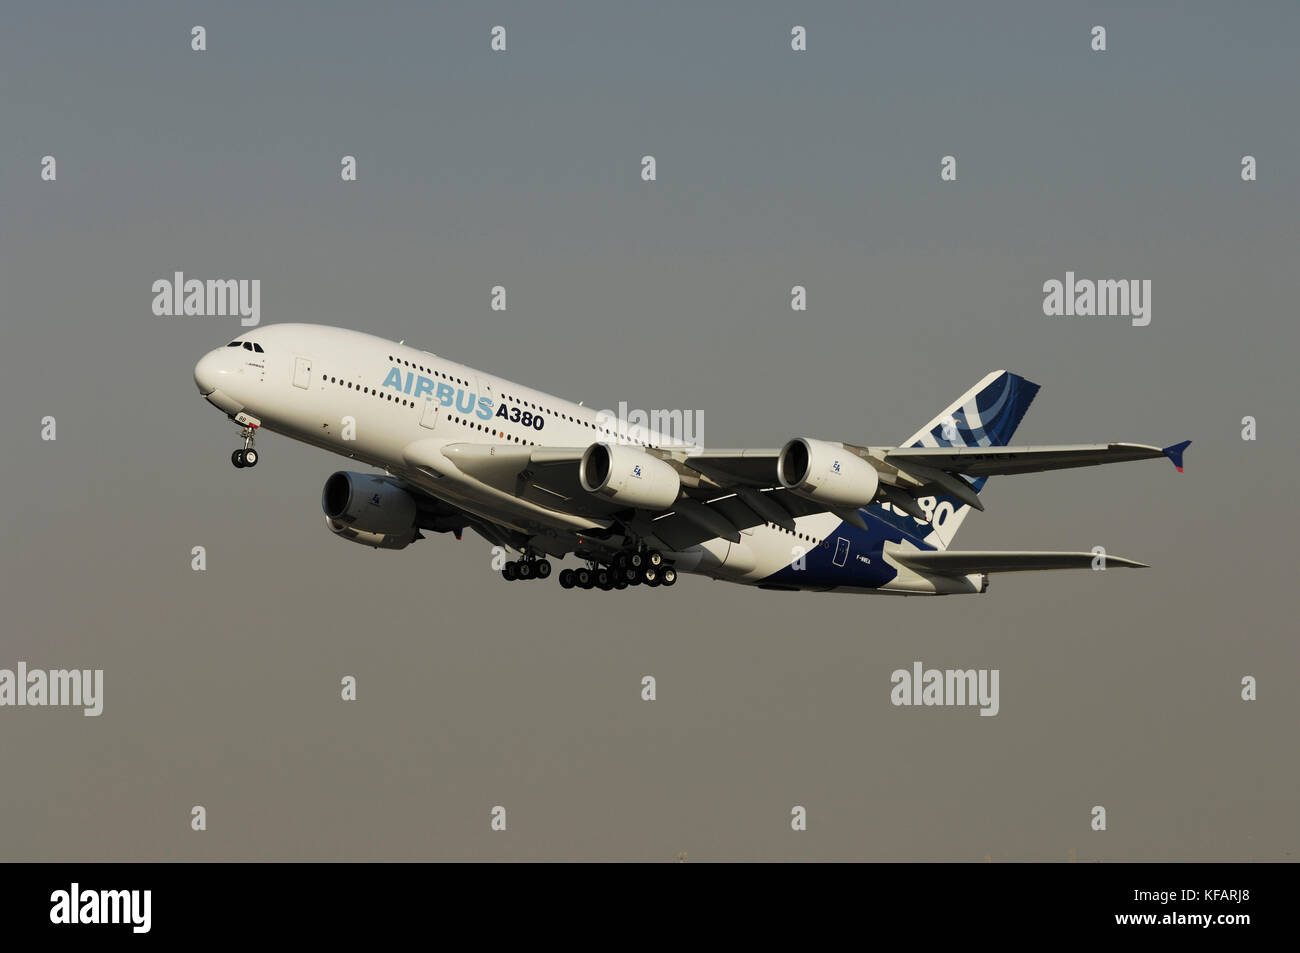 Airbus A380-800 climbing our after take-off at the Dubai AirShow 2007 Stock Photo